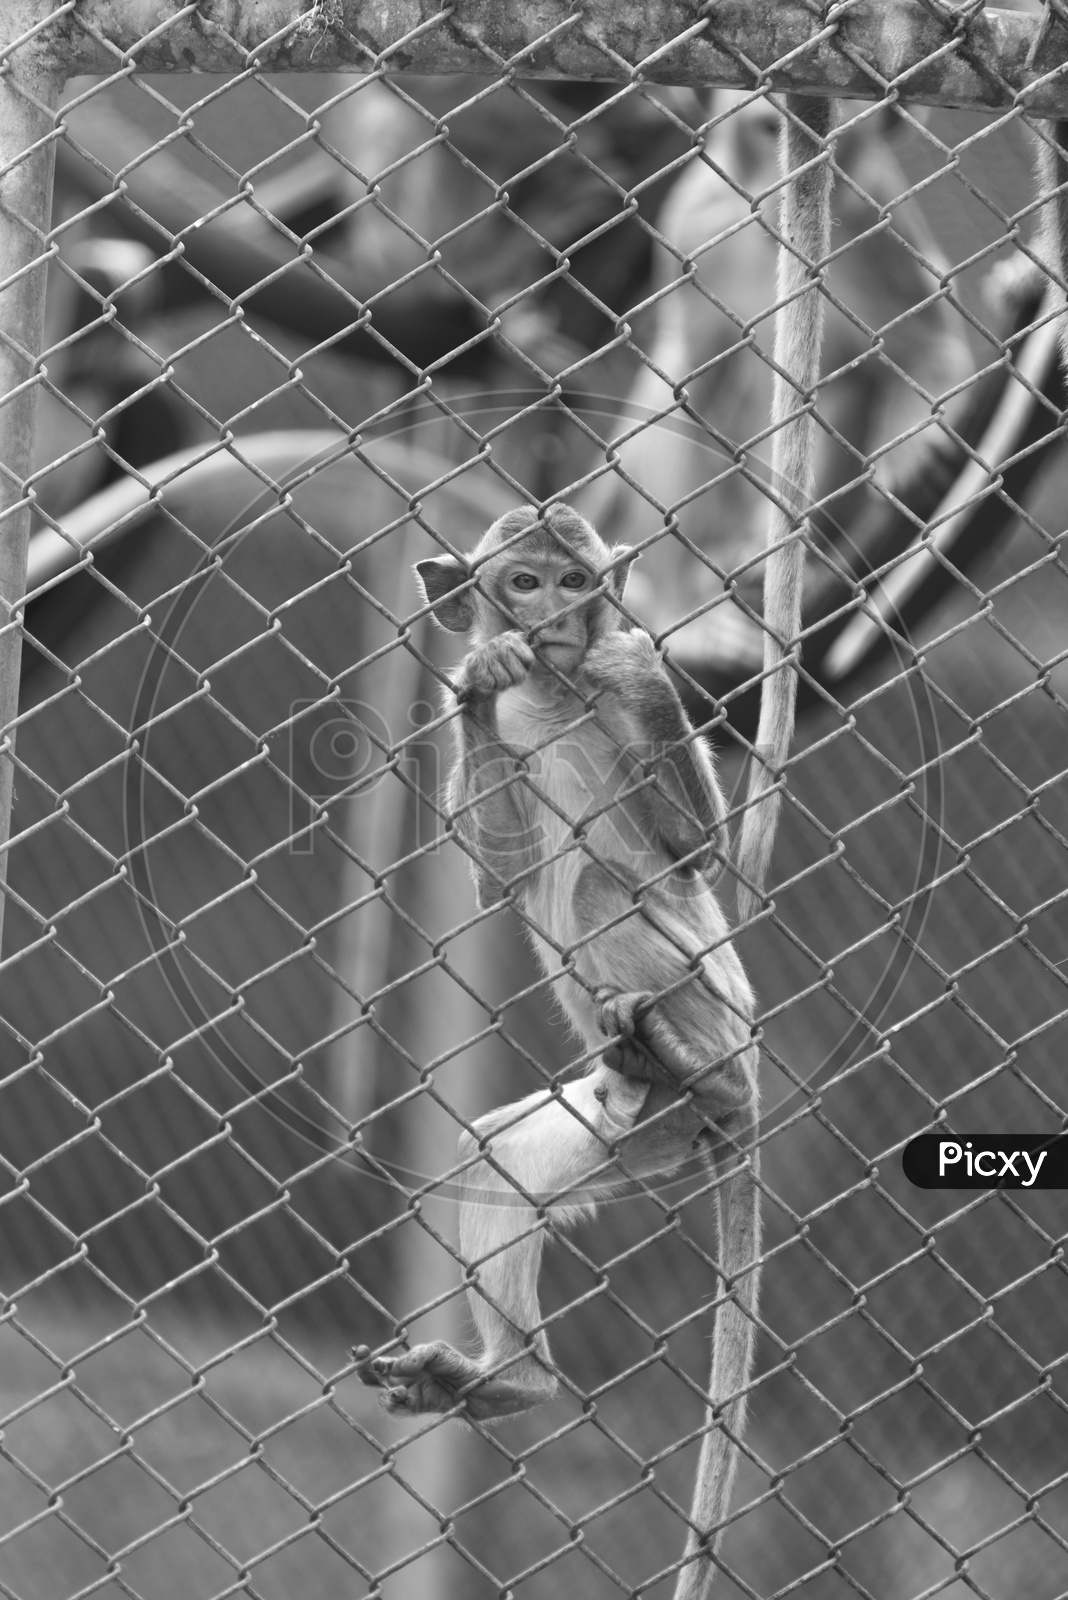 alone monkey in cage